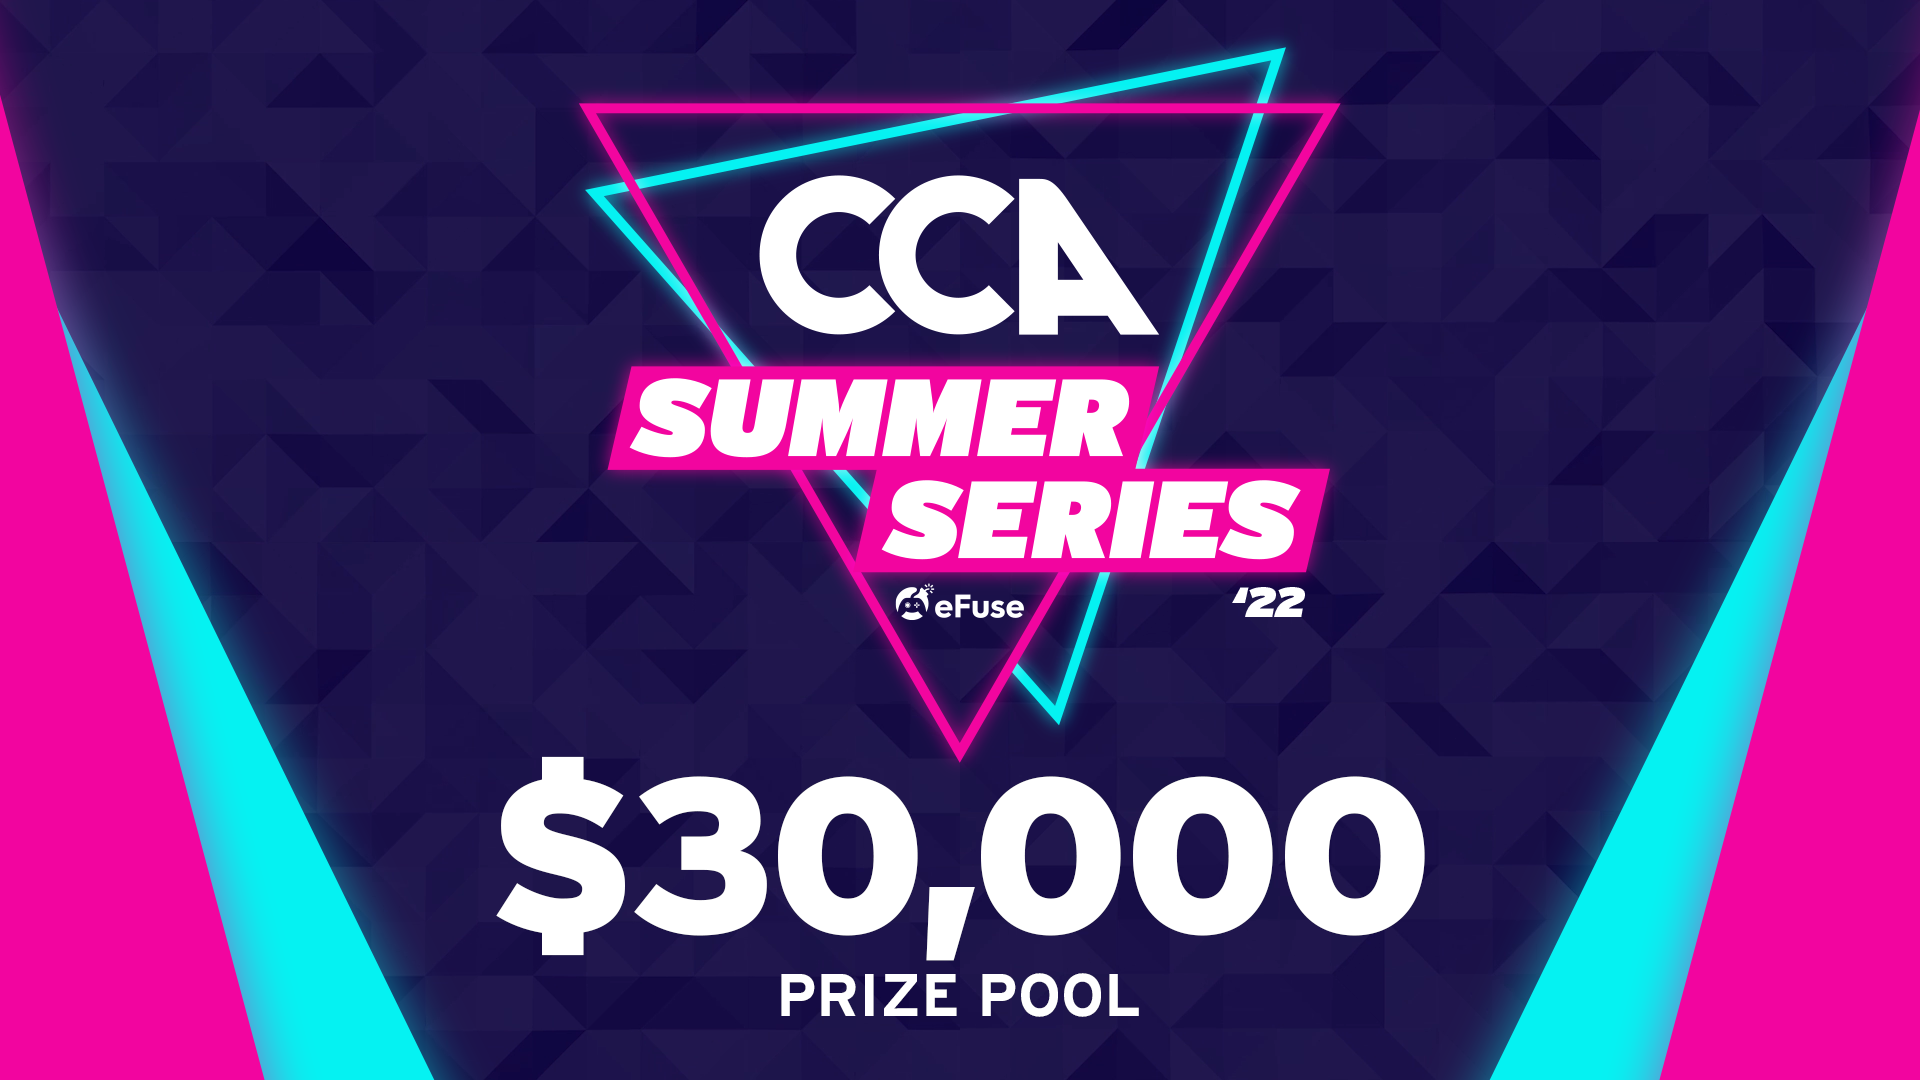 CCA Summer Series '22 Presented by Efuse Announcement Graphic on a Purple Background with Neon Blue and Pink Accents